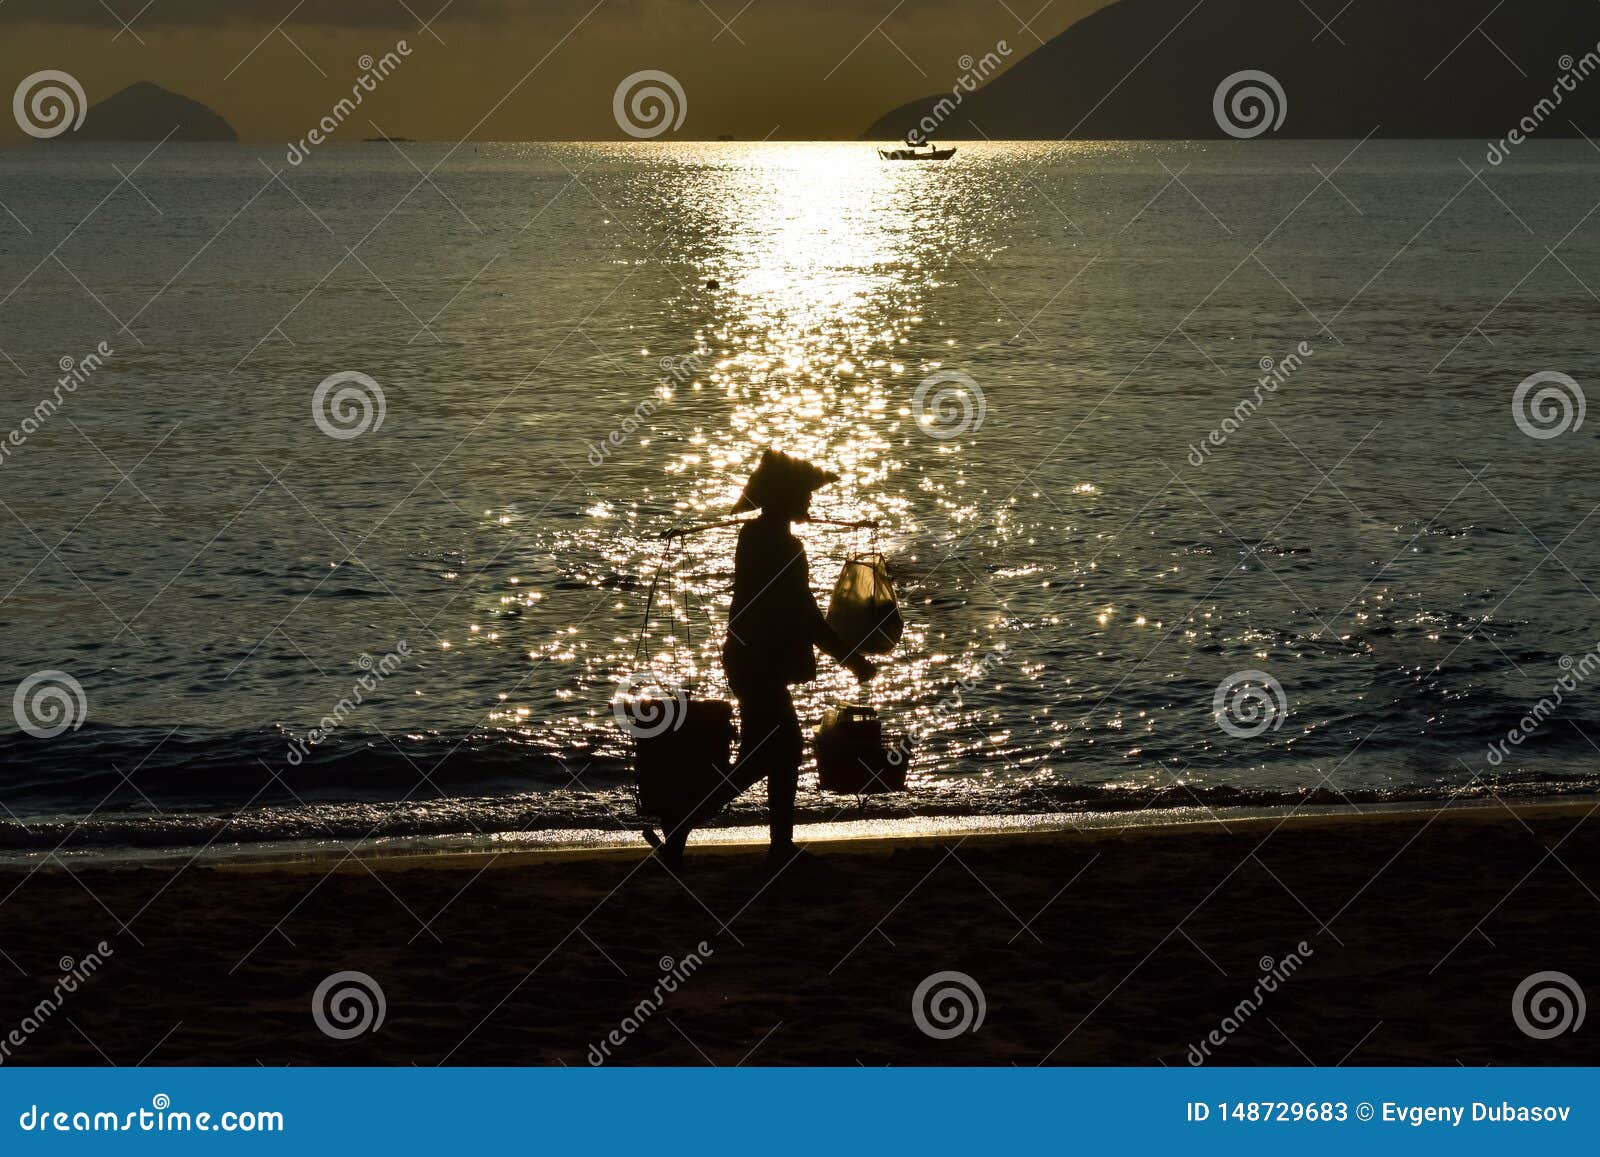 silhouette of food vender against reflection of sun beam on the beach at dawn